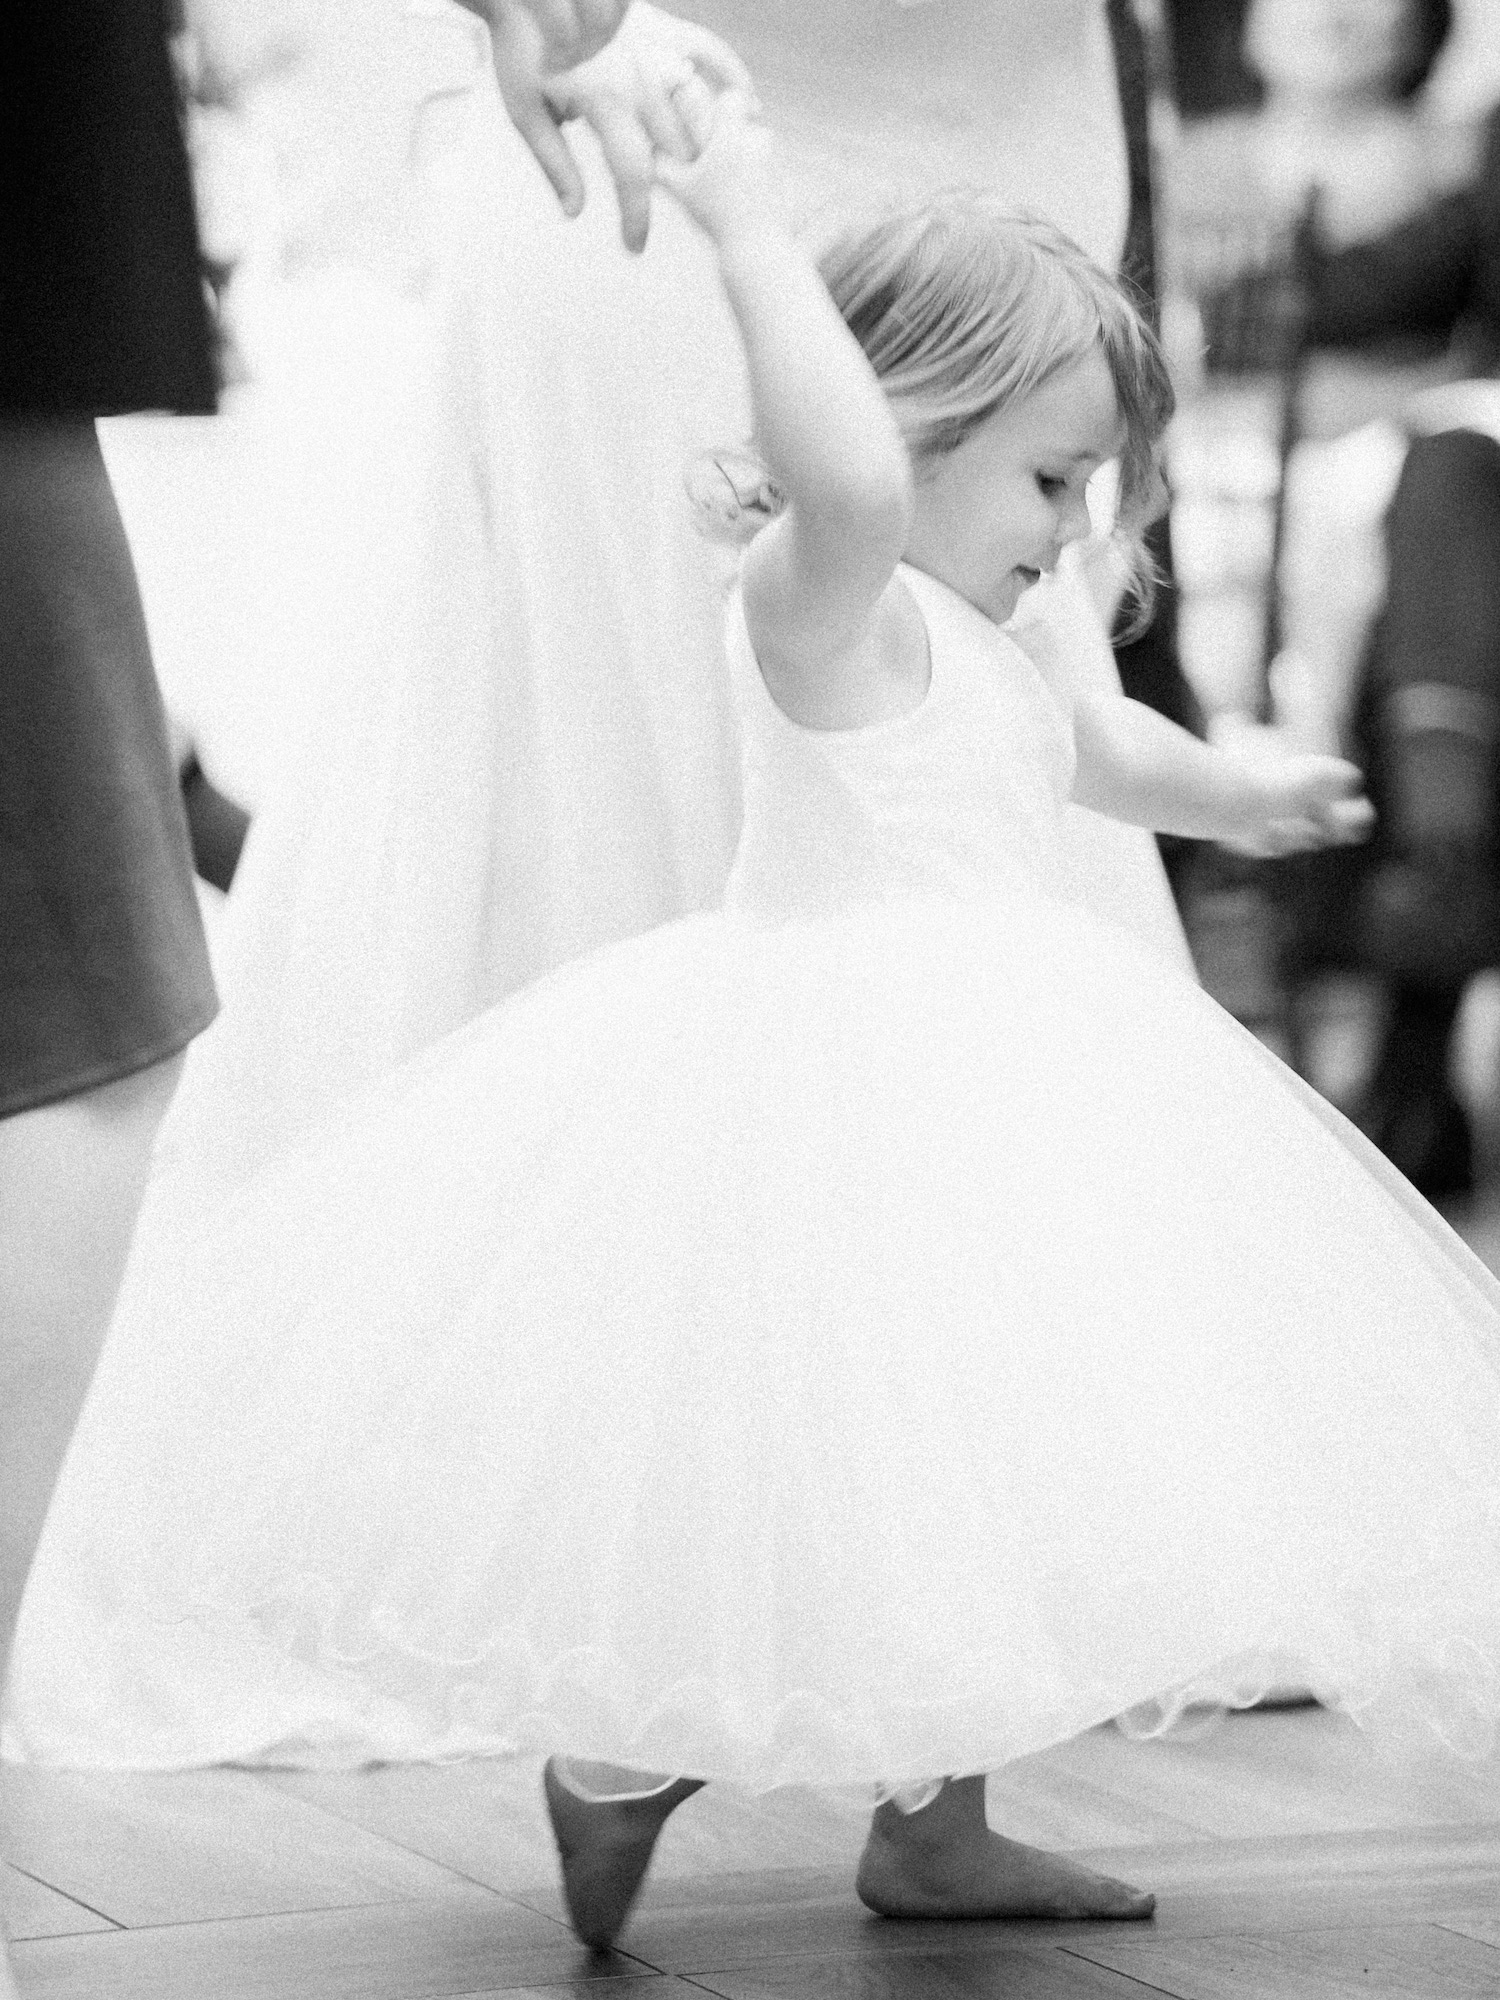 Flower girl twirling in a tutu at a wedding